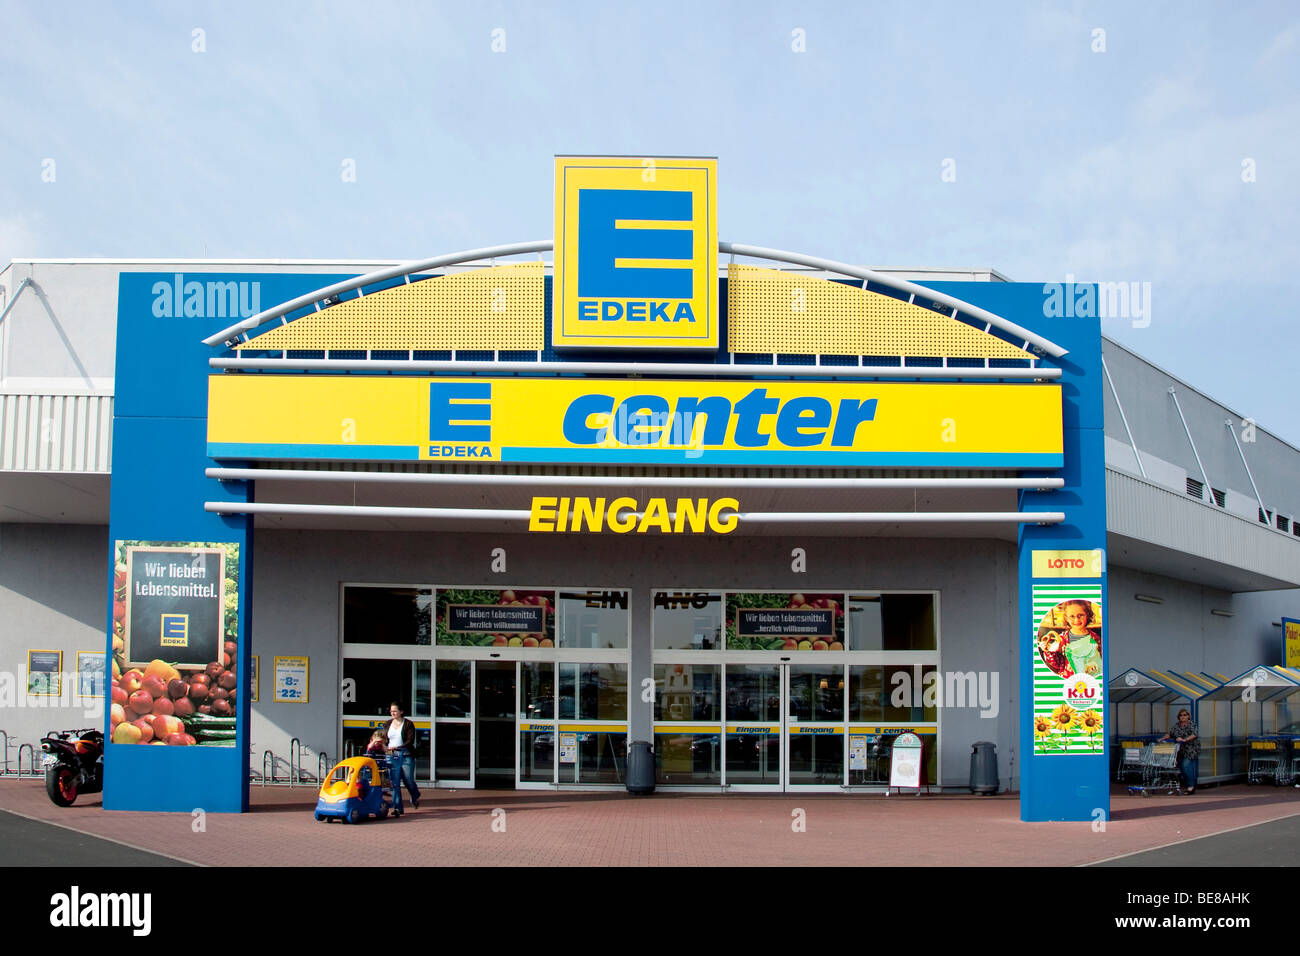 Edeka Germany High Resolution Stock Photography and Images - Alamy